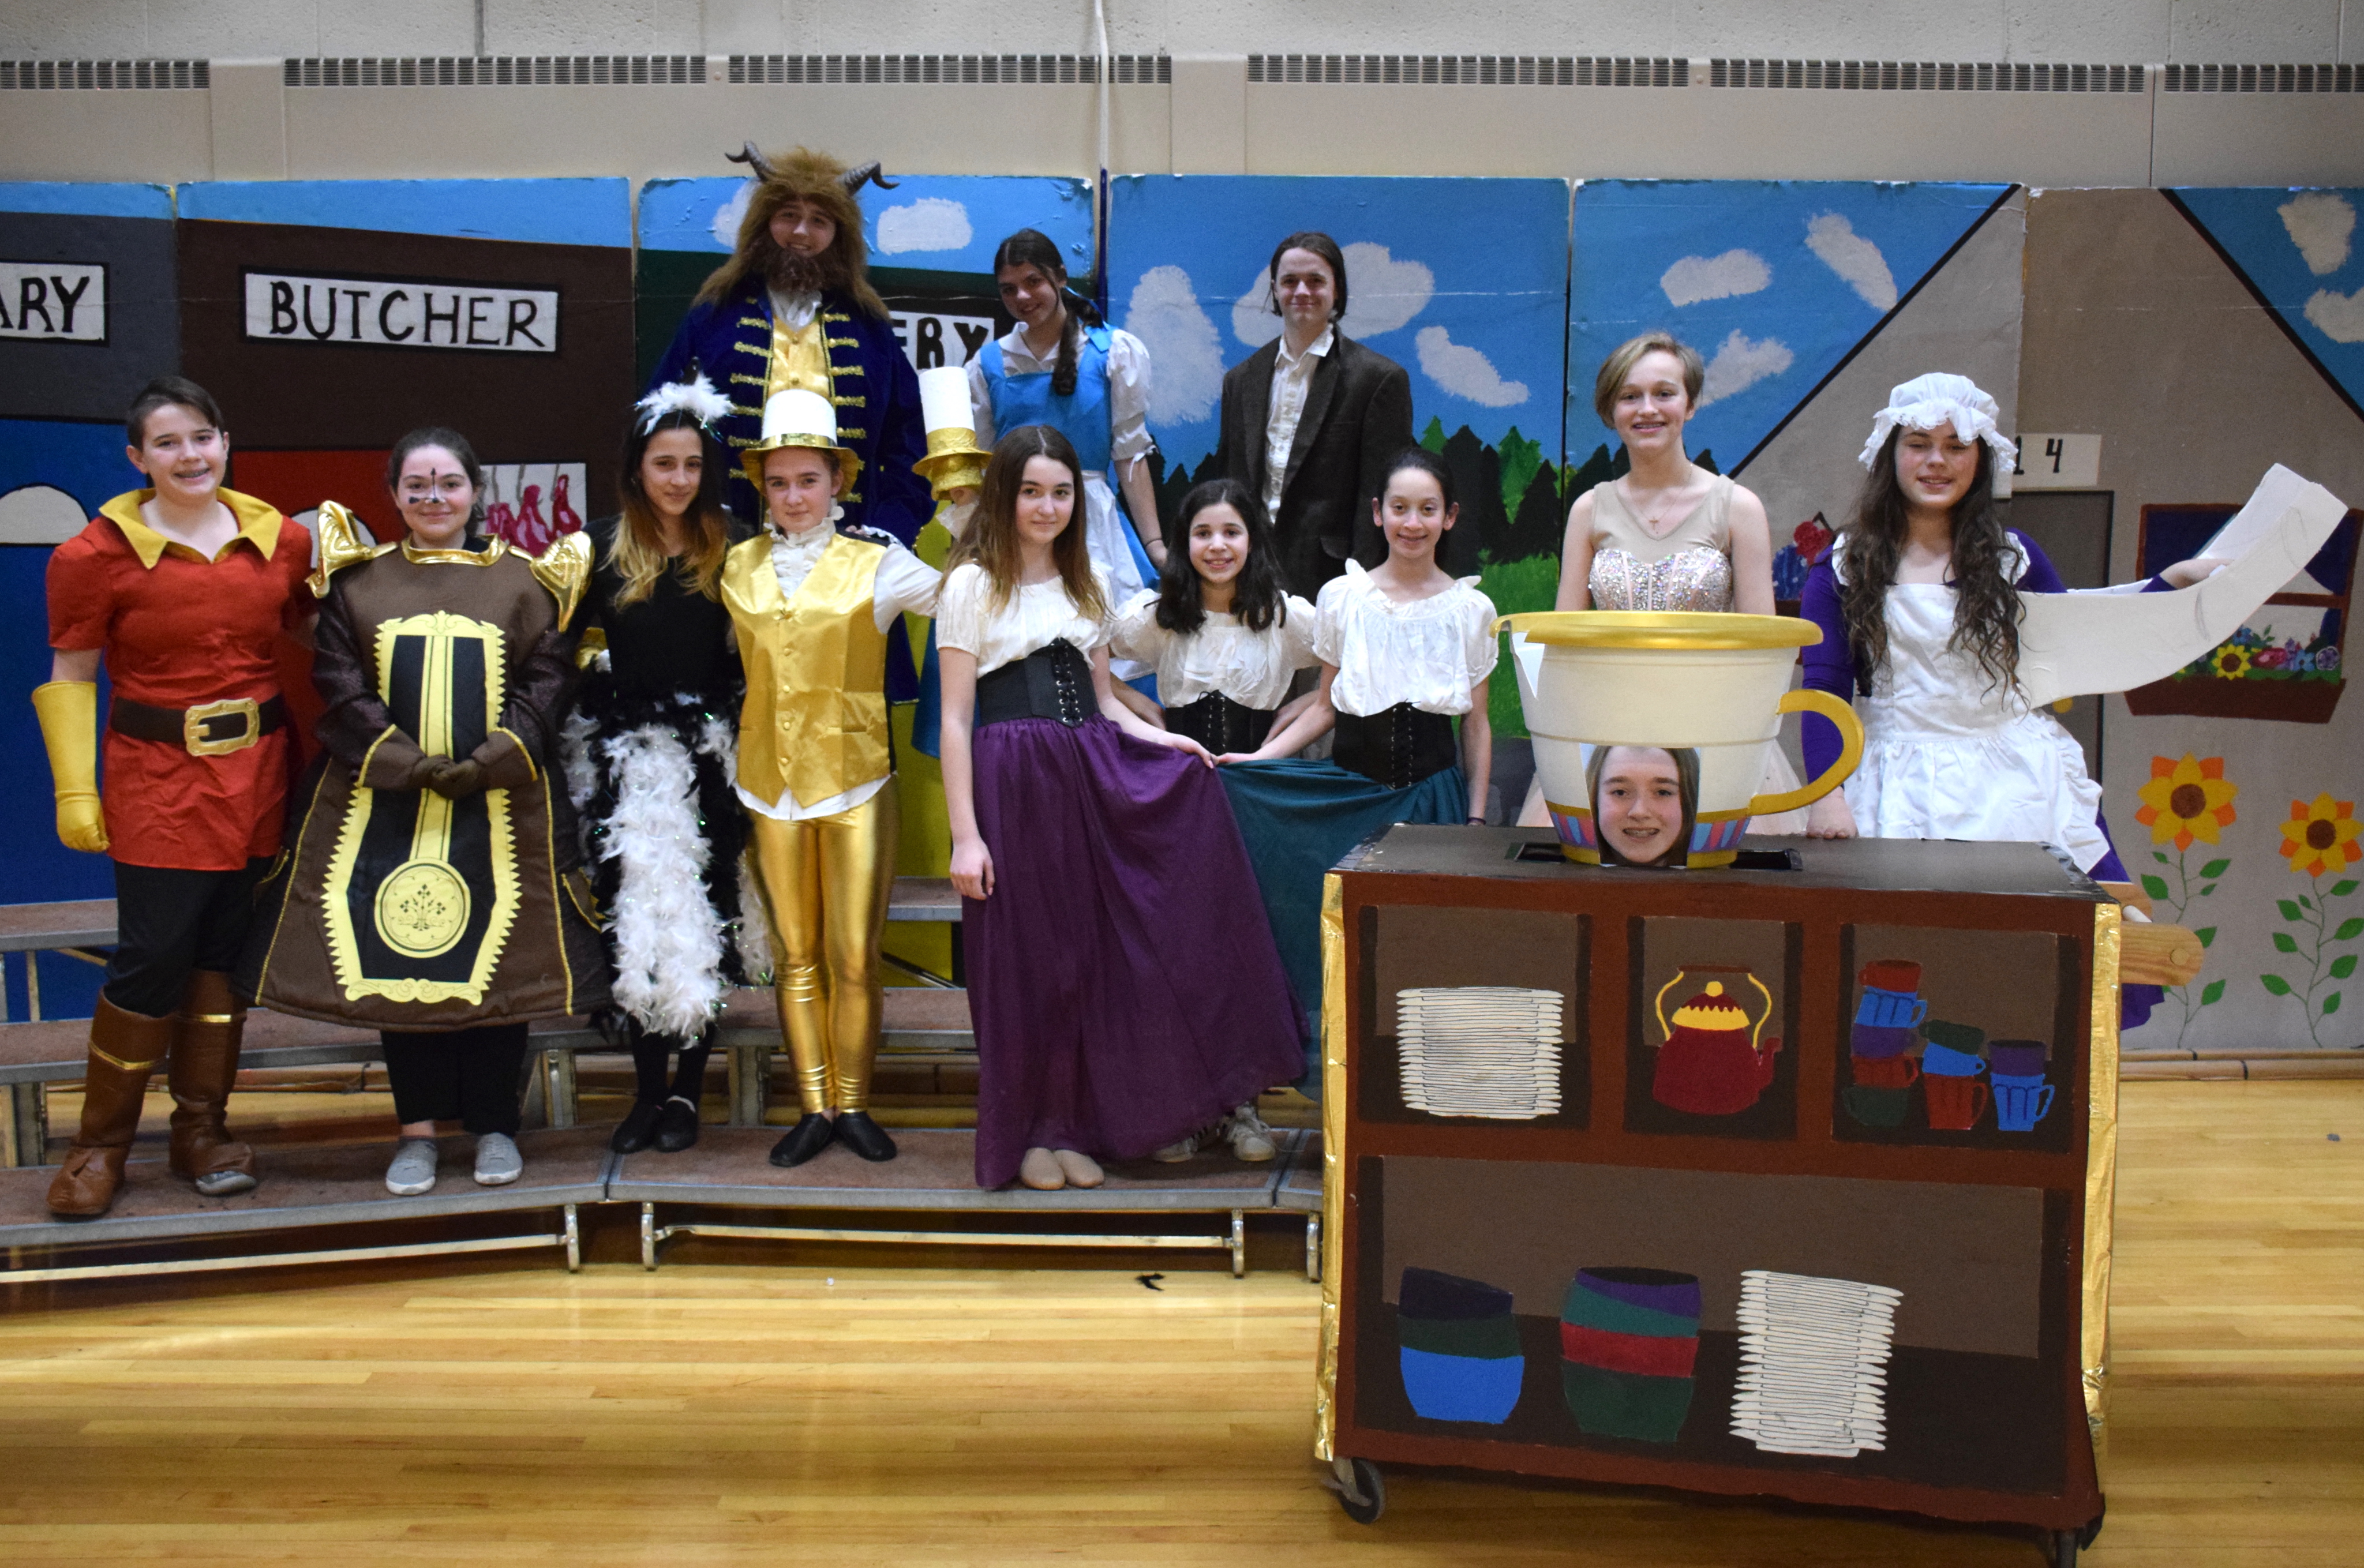 ‘Beauty and the Beast’ Comes To Seaford